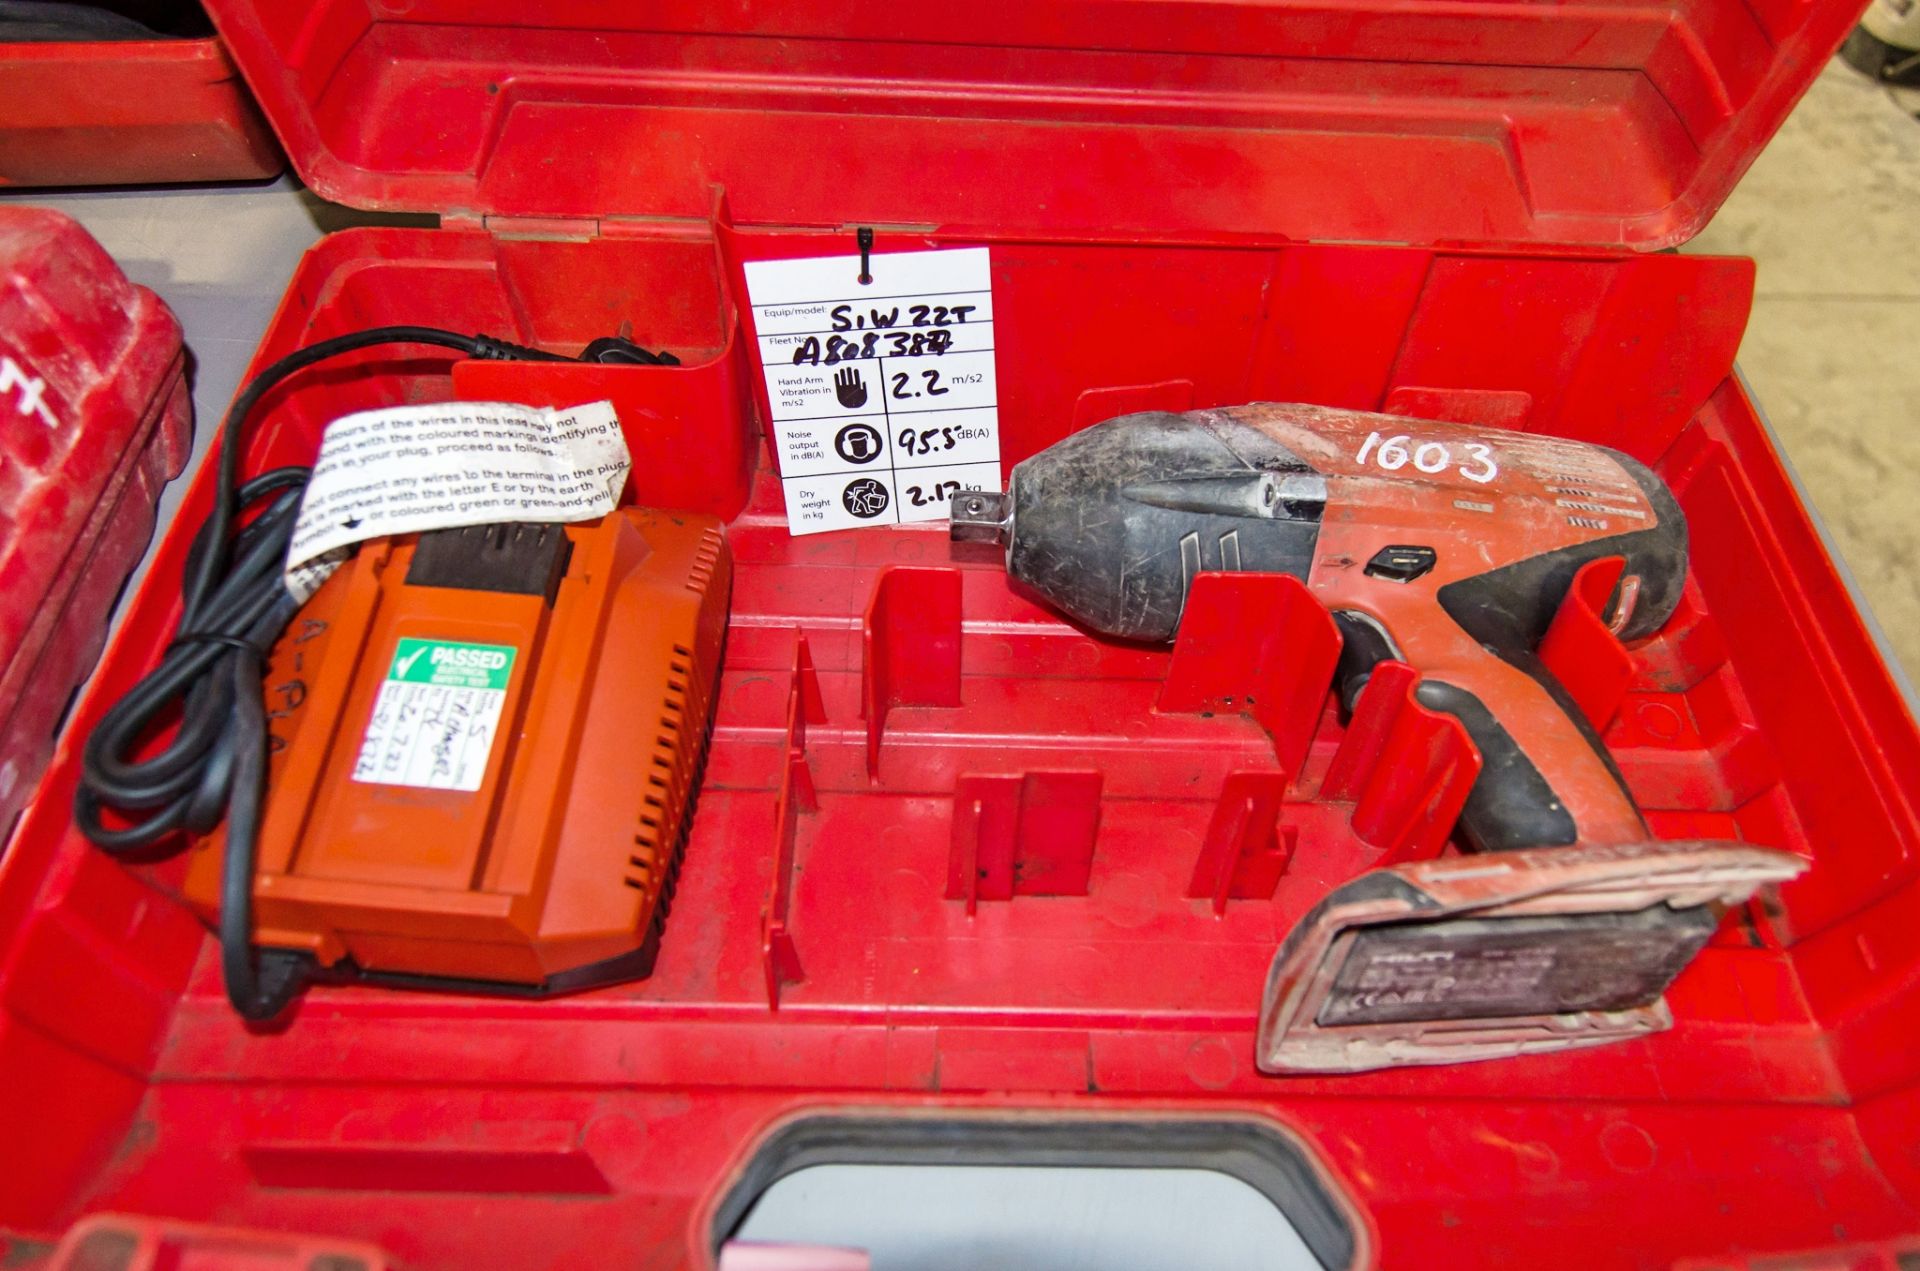 Hilti SIW22-T 22v cordless 1/2 inch drive impact gun c/w charger and carry case ** No battery **